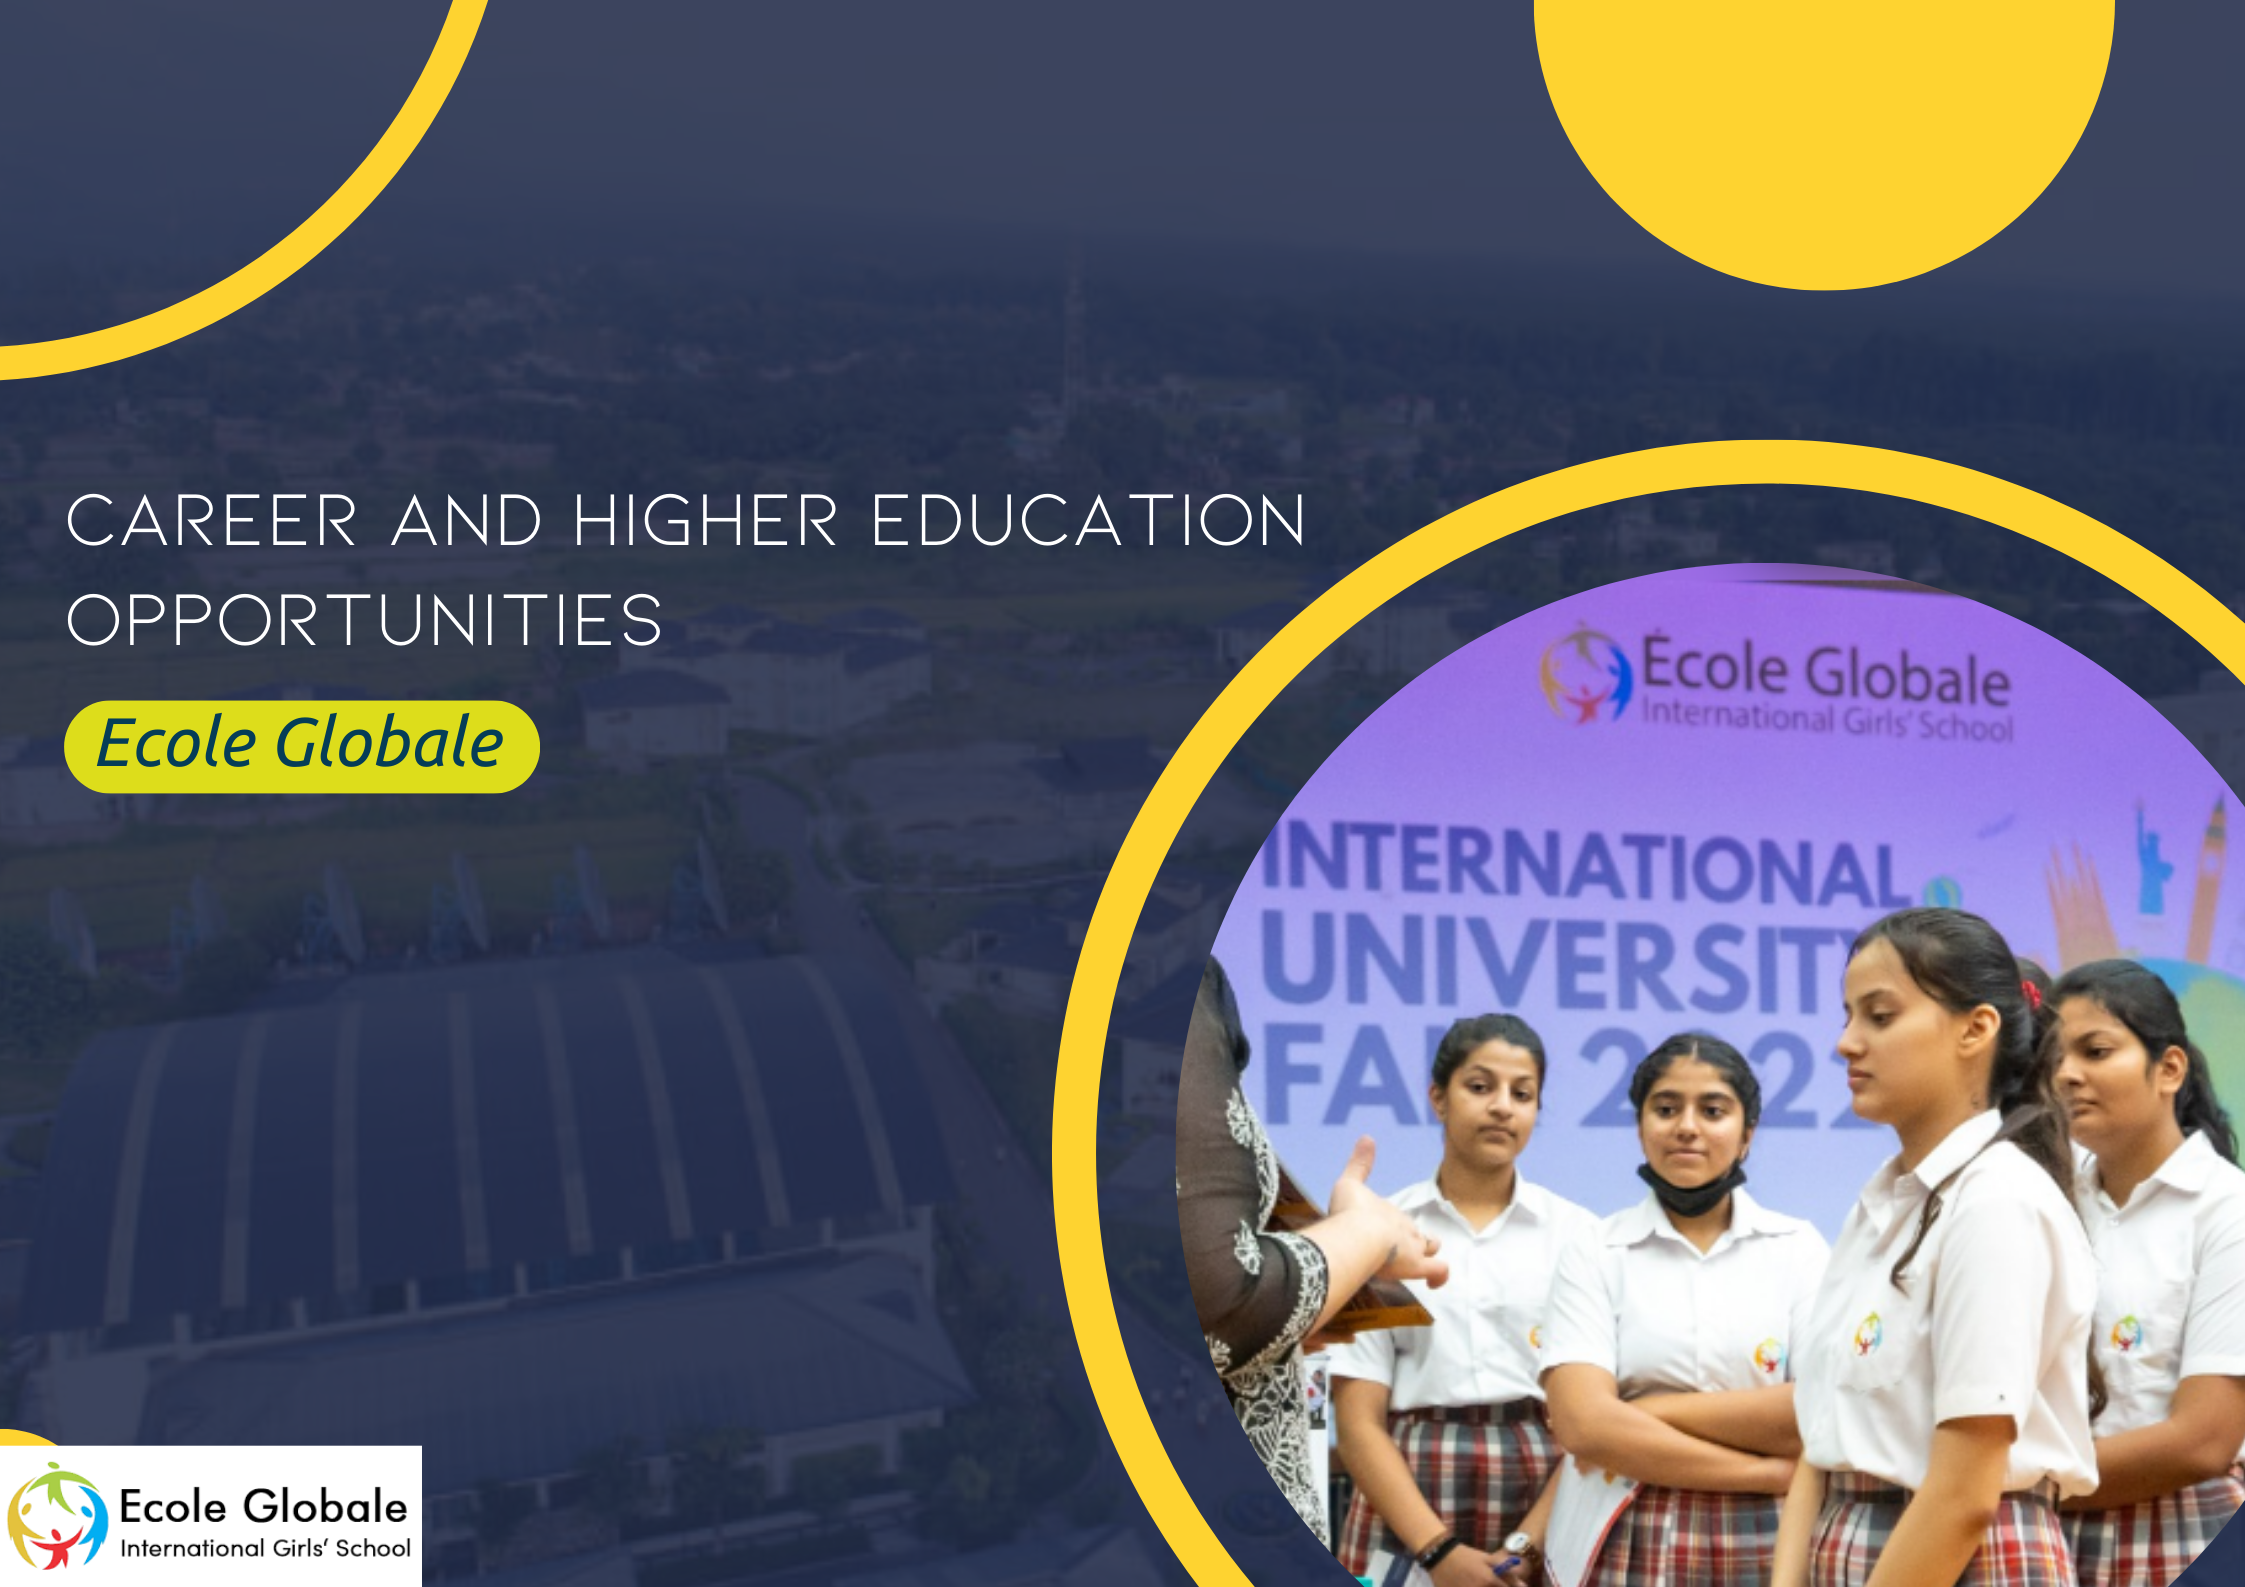 You are currently viewing Career and Higher Education Opportunities at Ecole Globale